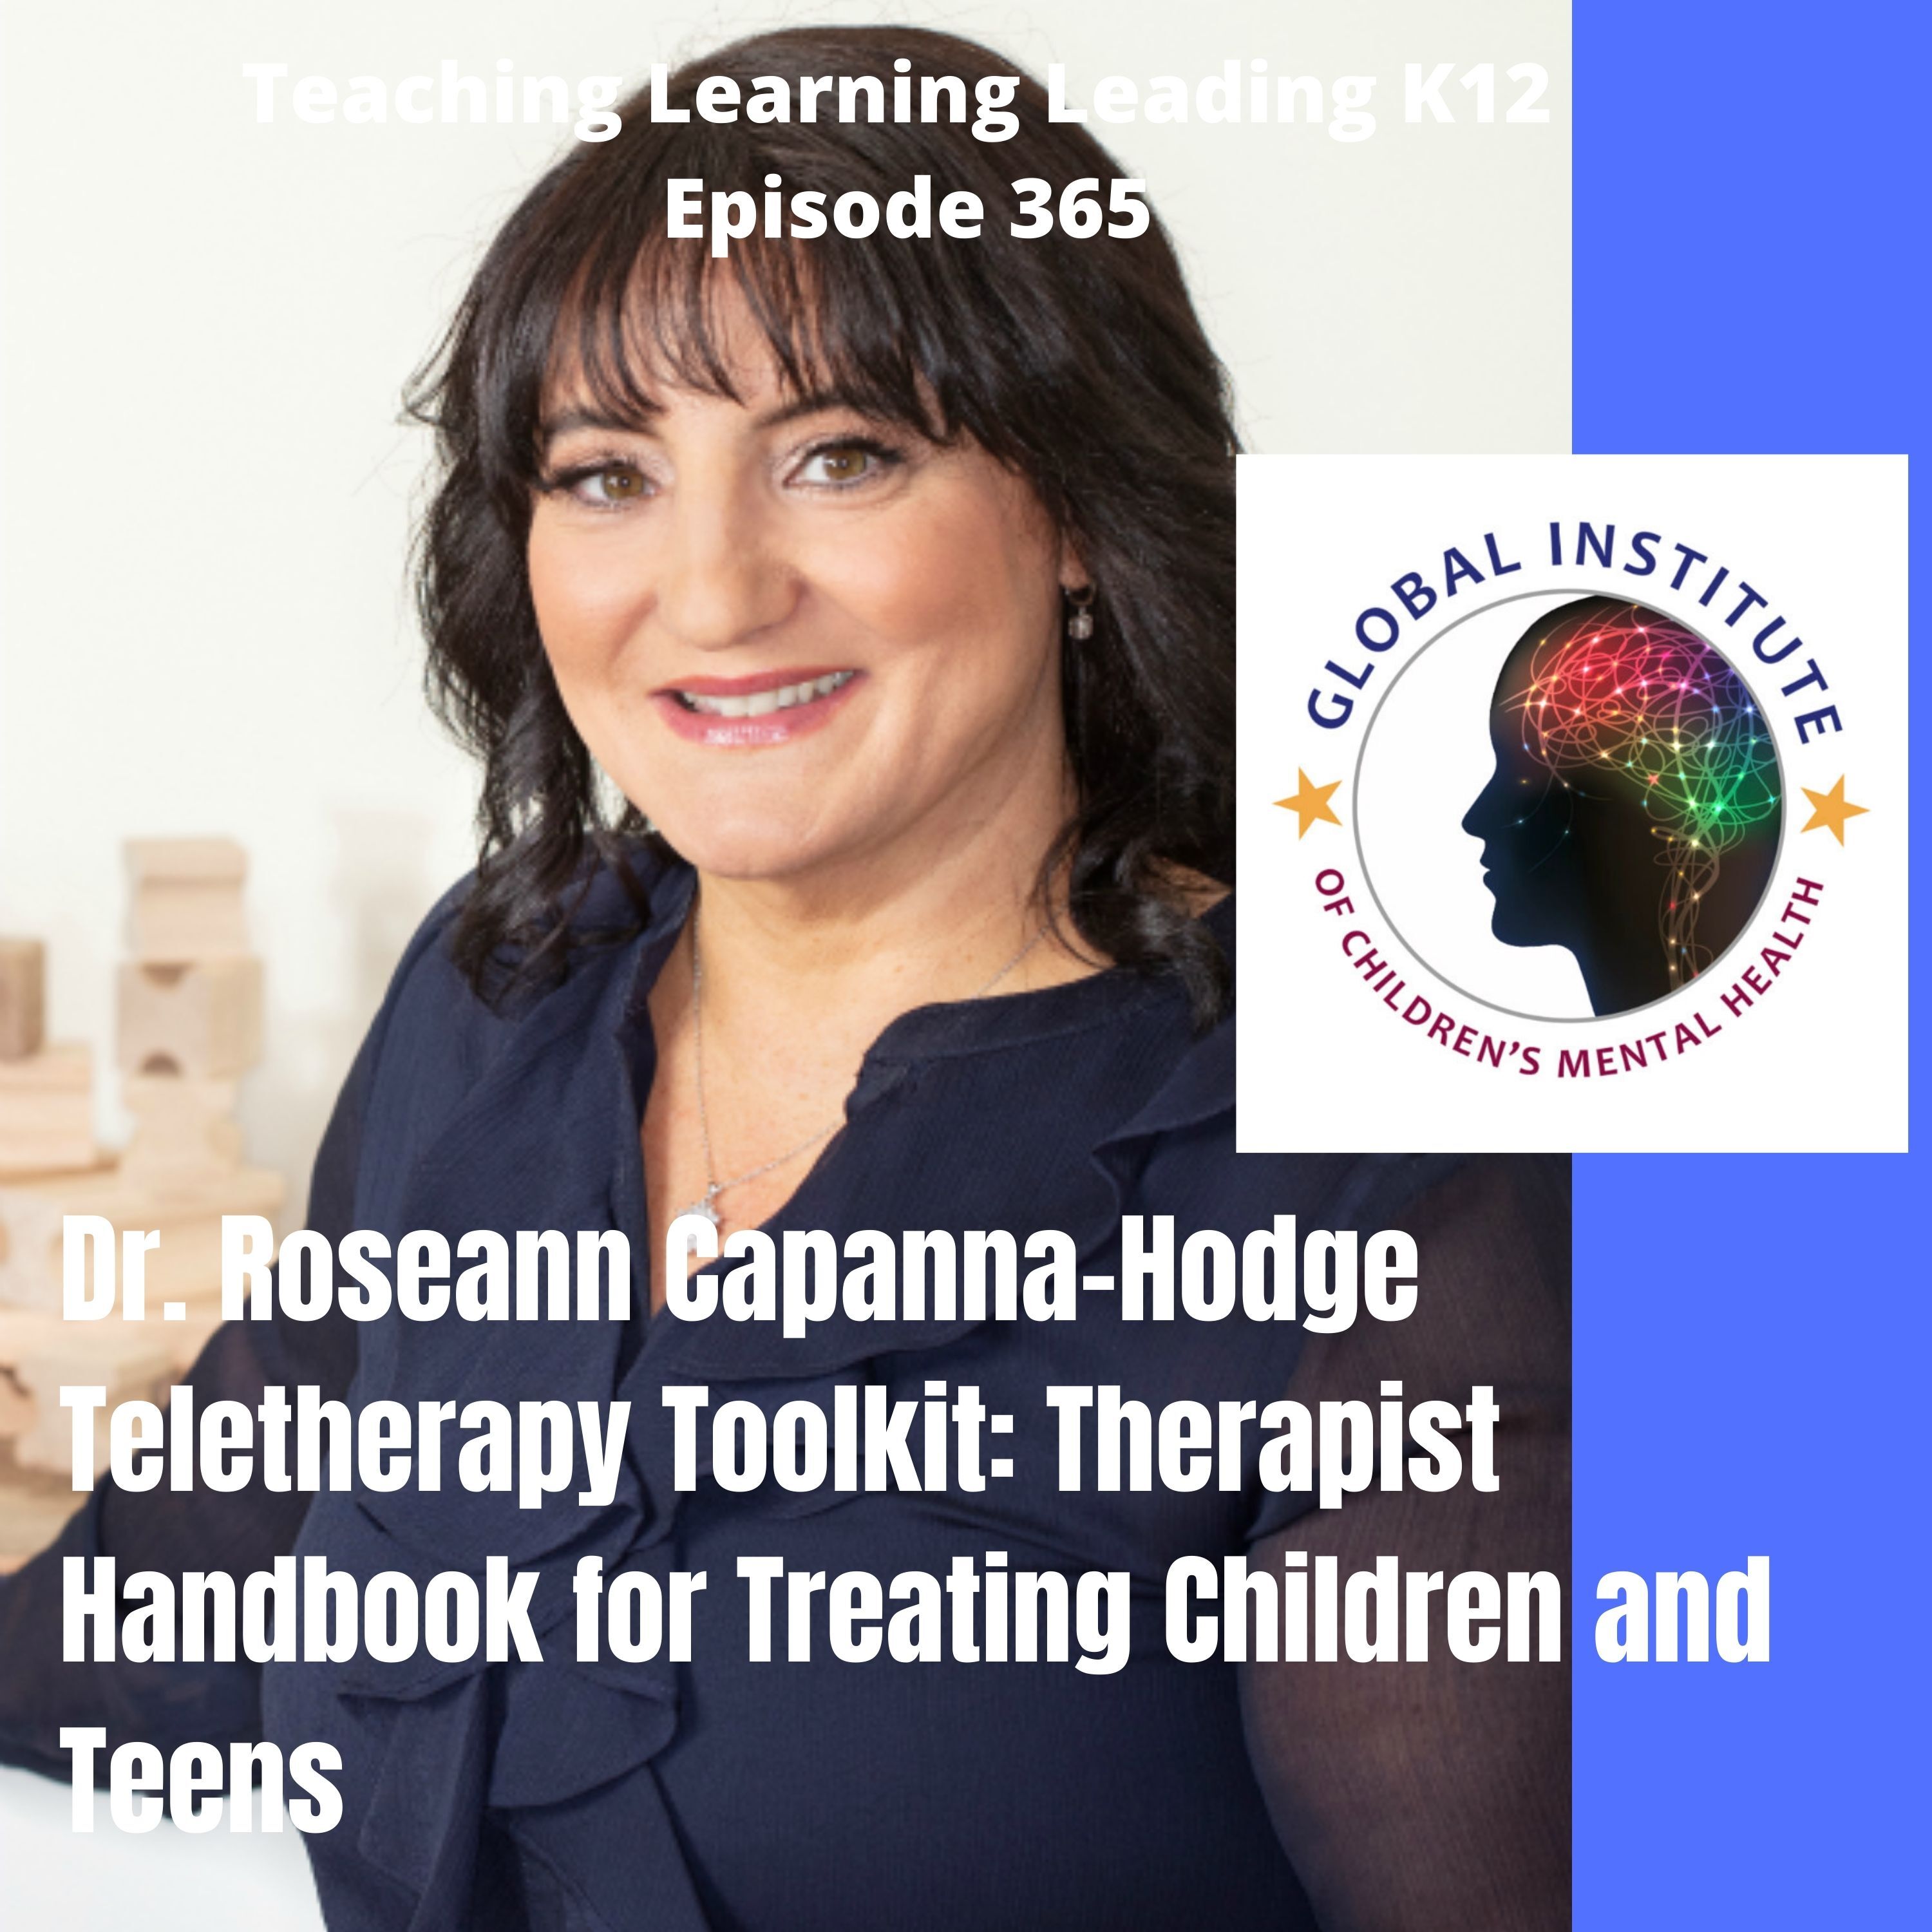 Dr. Roseann Capanna-Hodge - Teletherapy Toolkit: Therapist Handbook for Treating Children and Teens -365